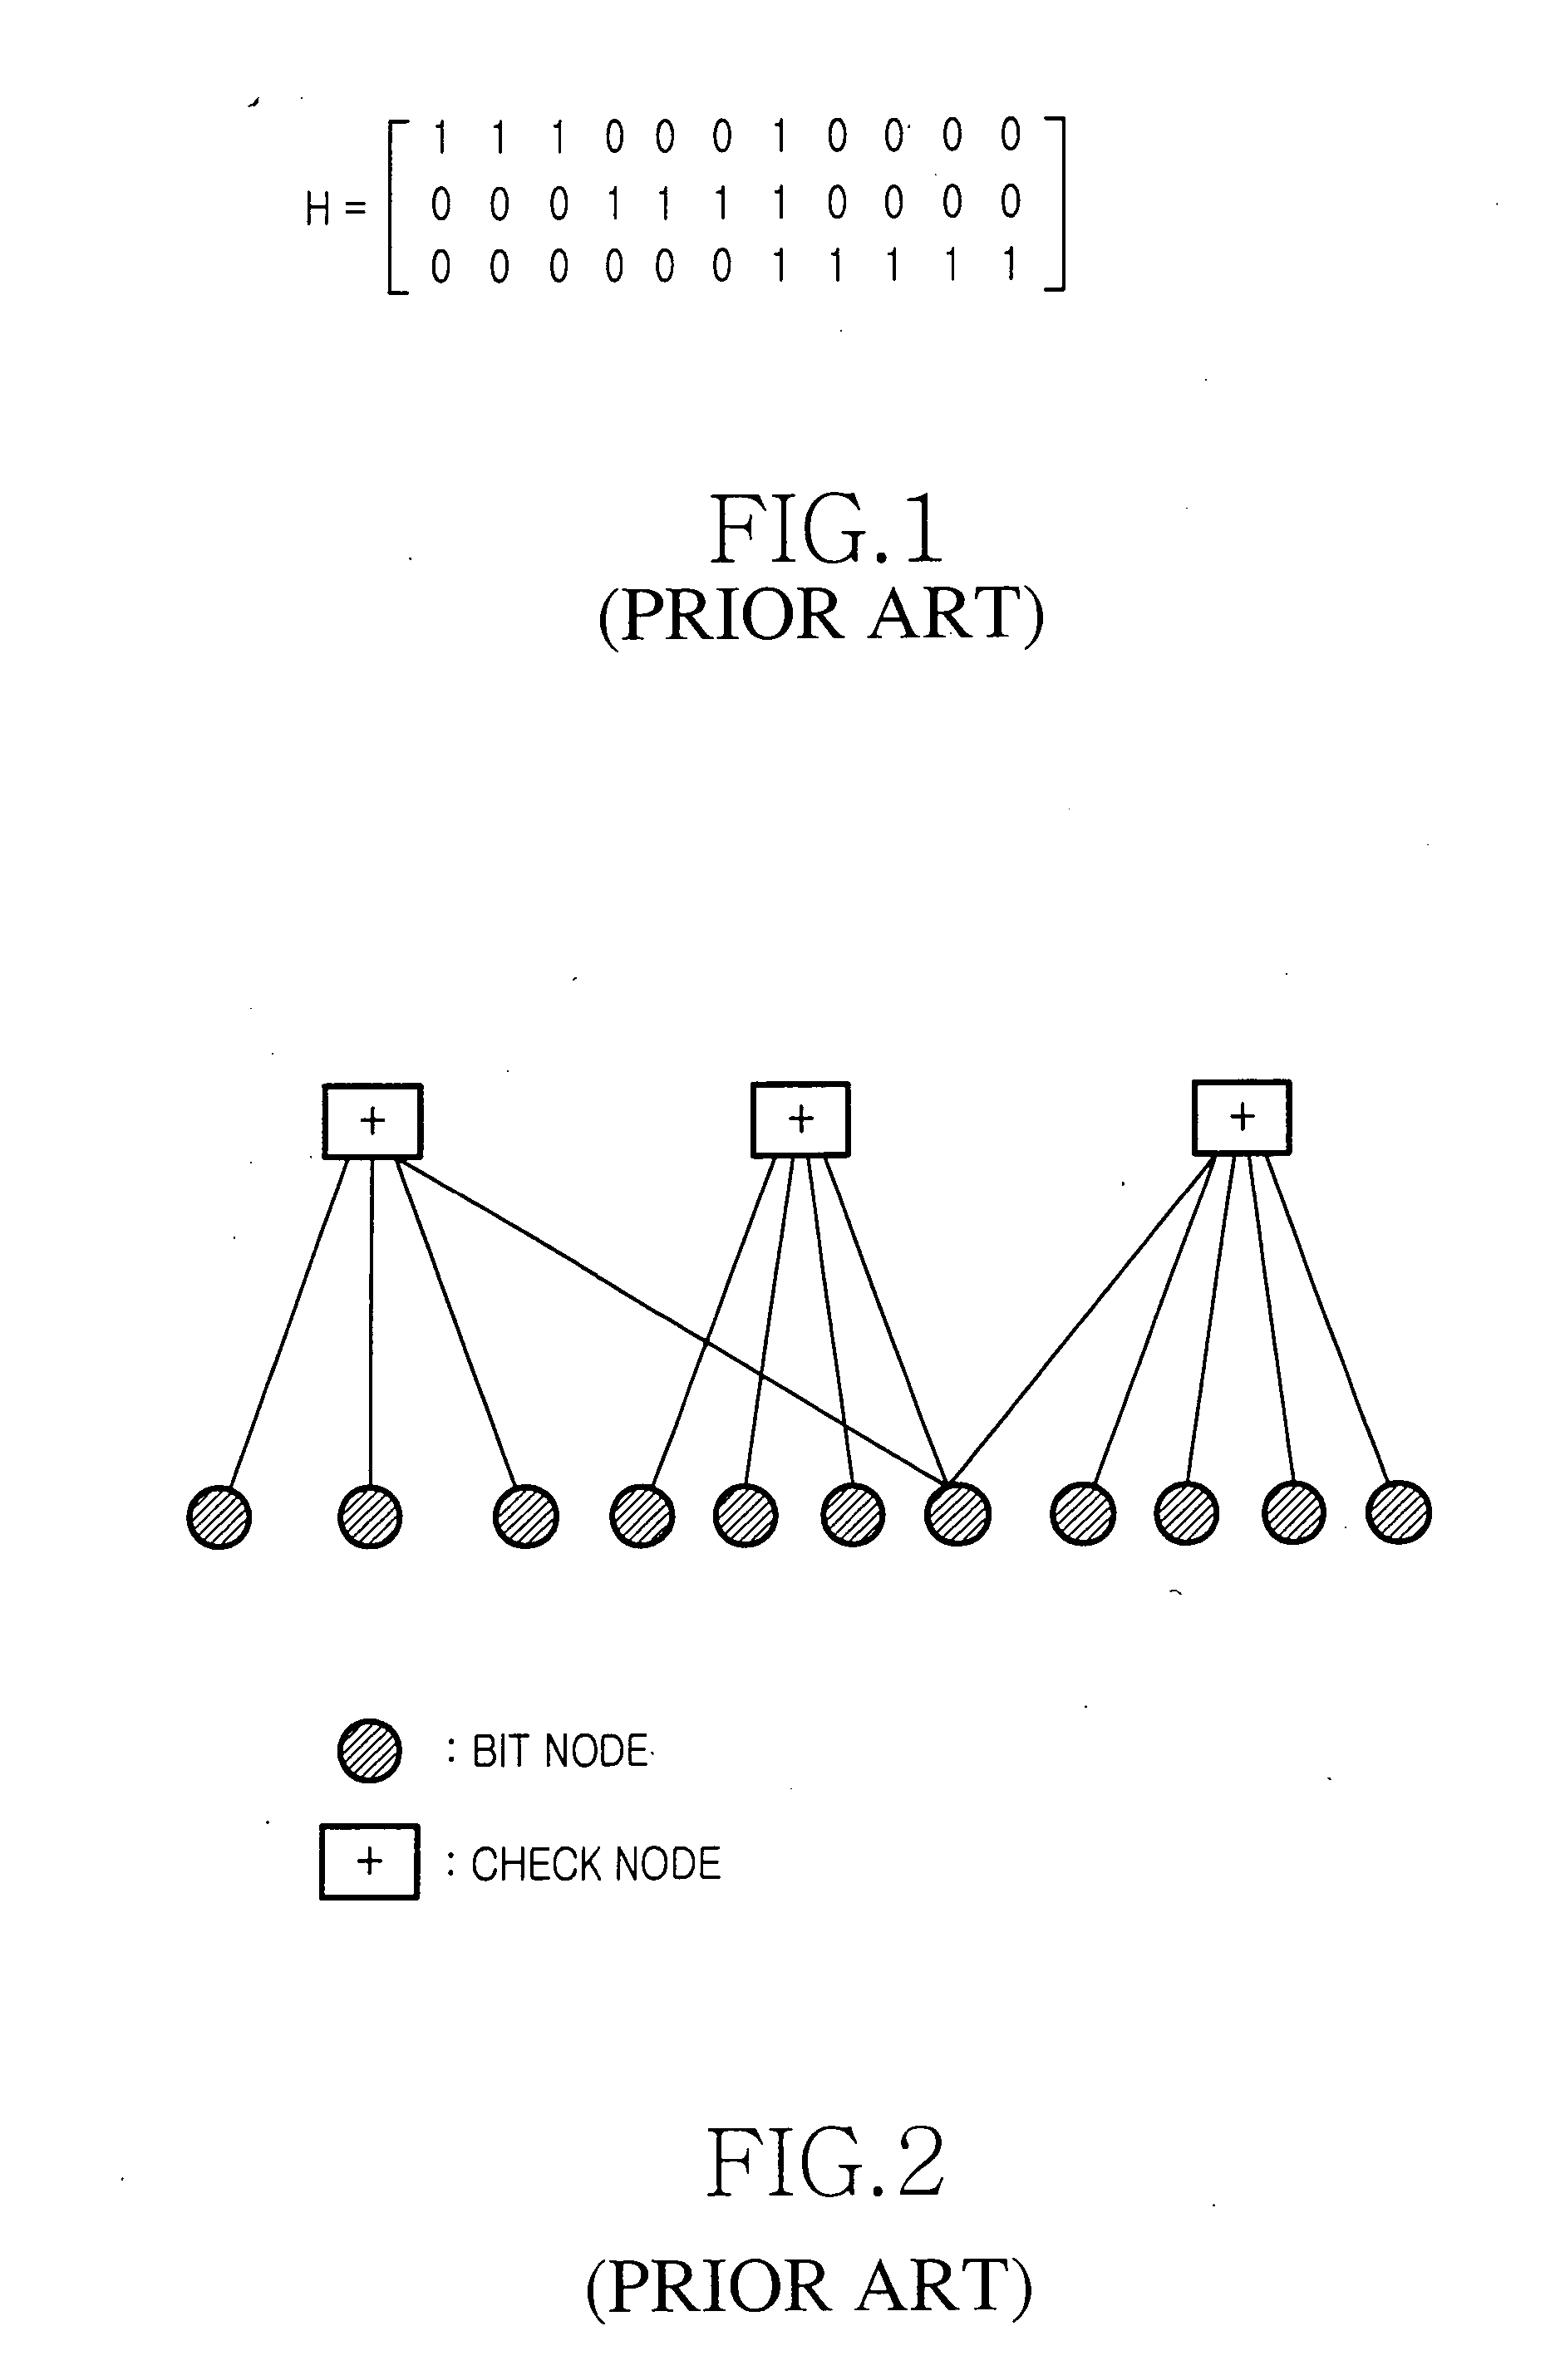 Method for puncturing an LDPC channel code